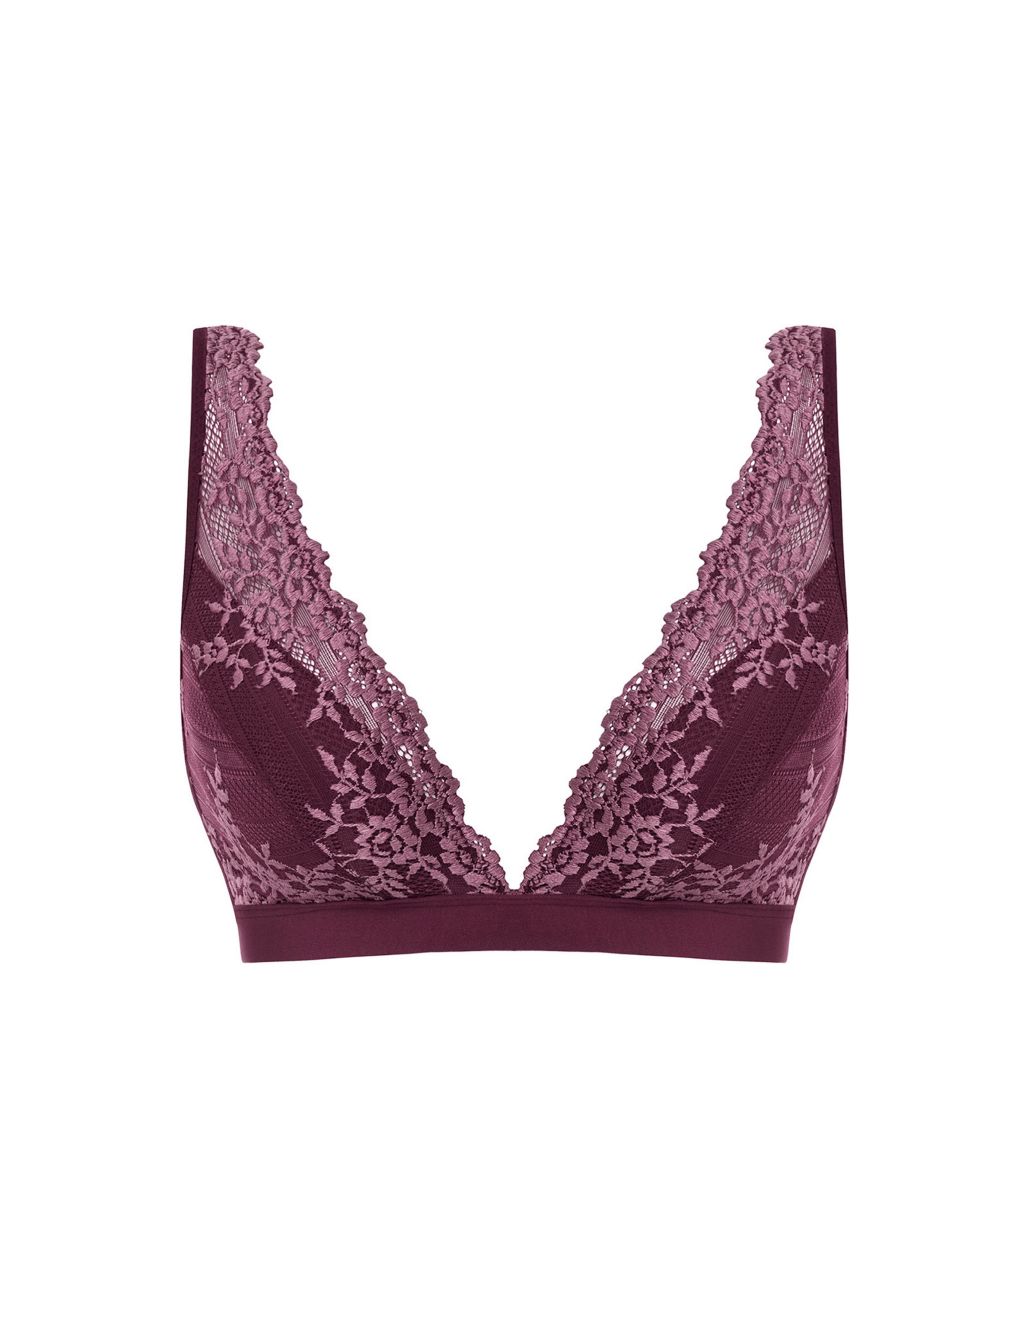 Embrace Floral Lace Non Wired Plunge Bra image 2